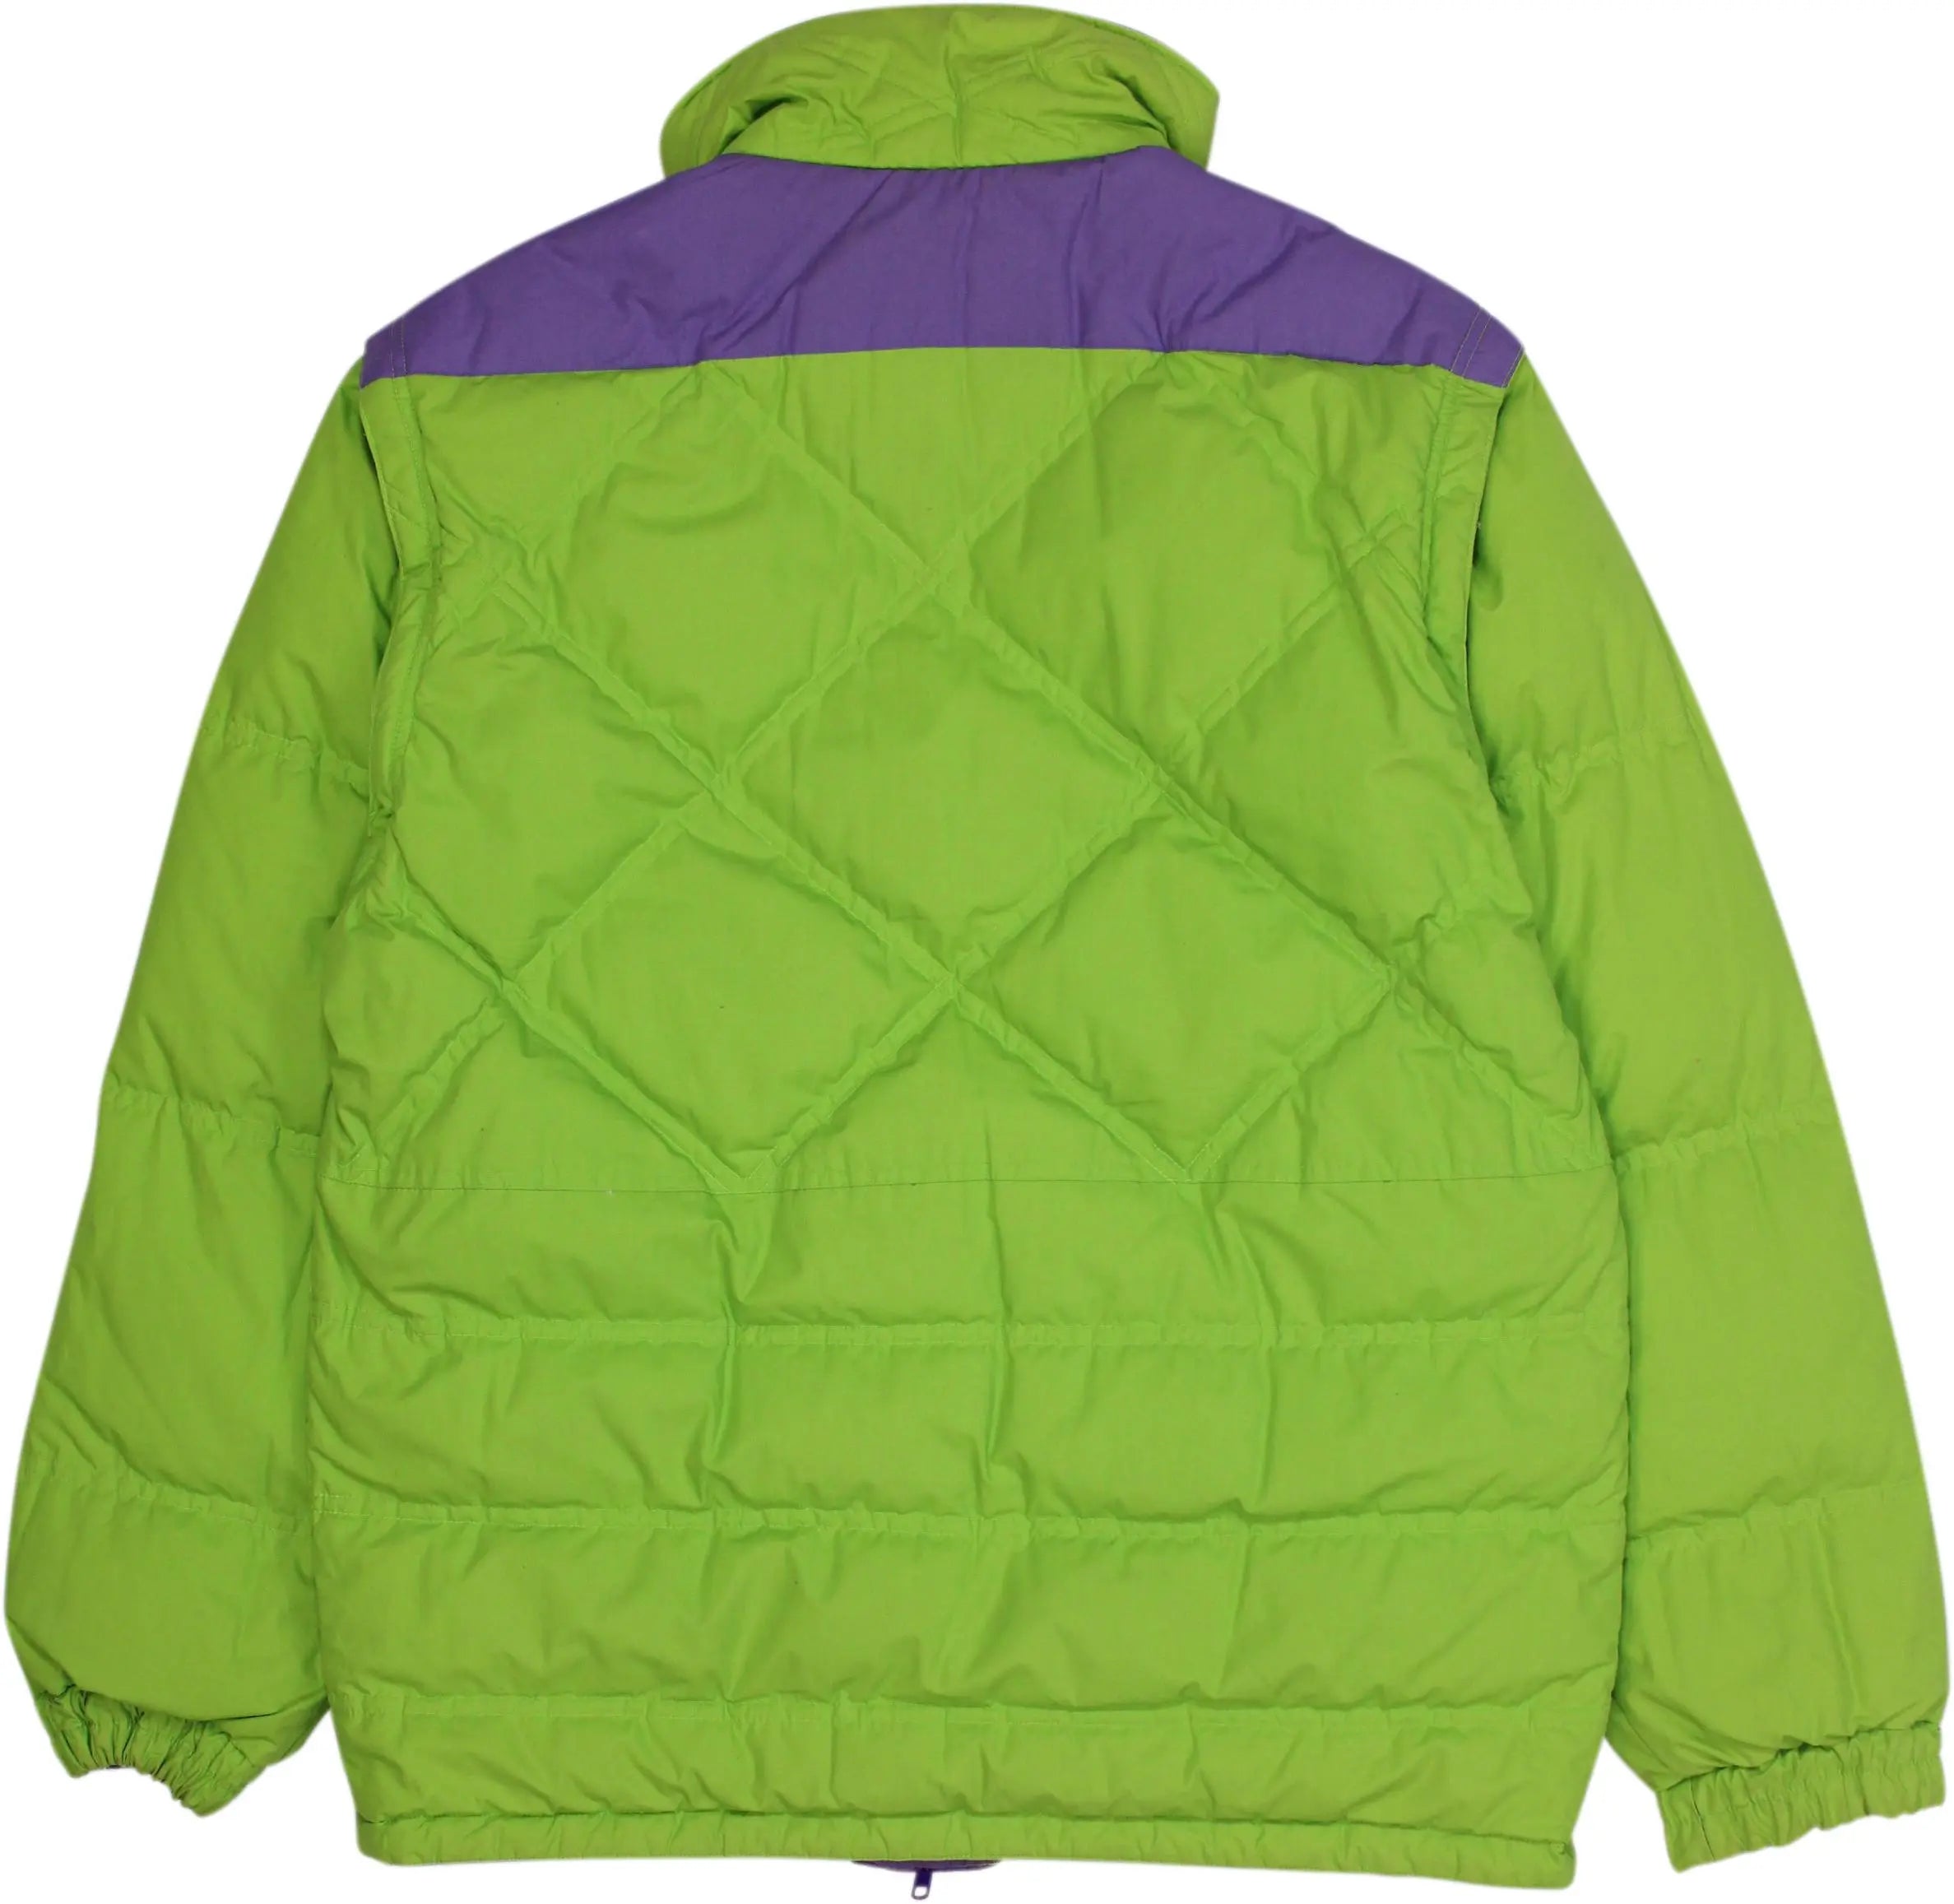 Mc Kee's - 70/80s Reversible Down Insulated Ski Jacket by Mc Kee's- ThriftTale.com - Vintage and second handclothing